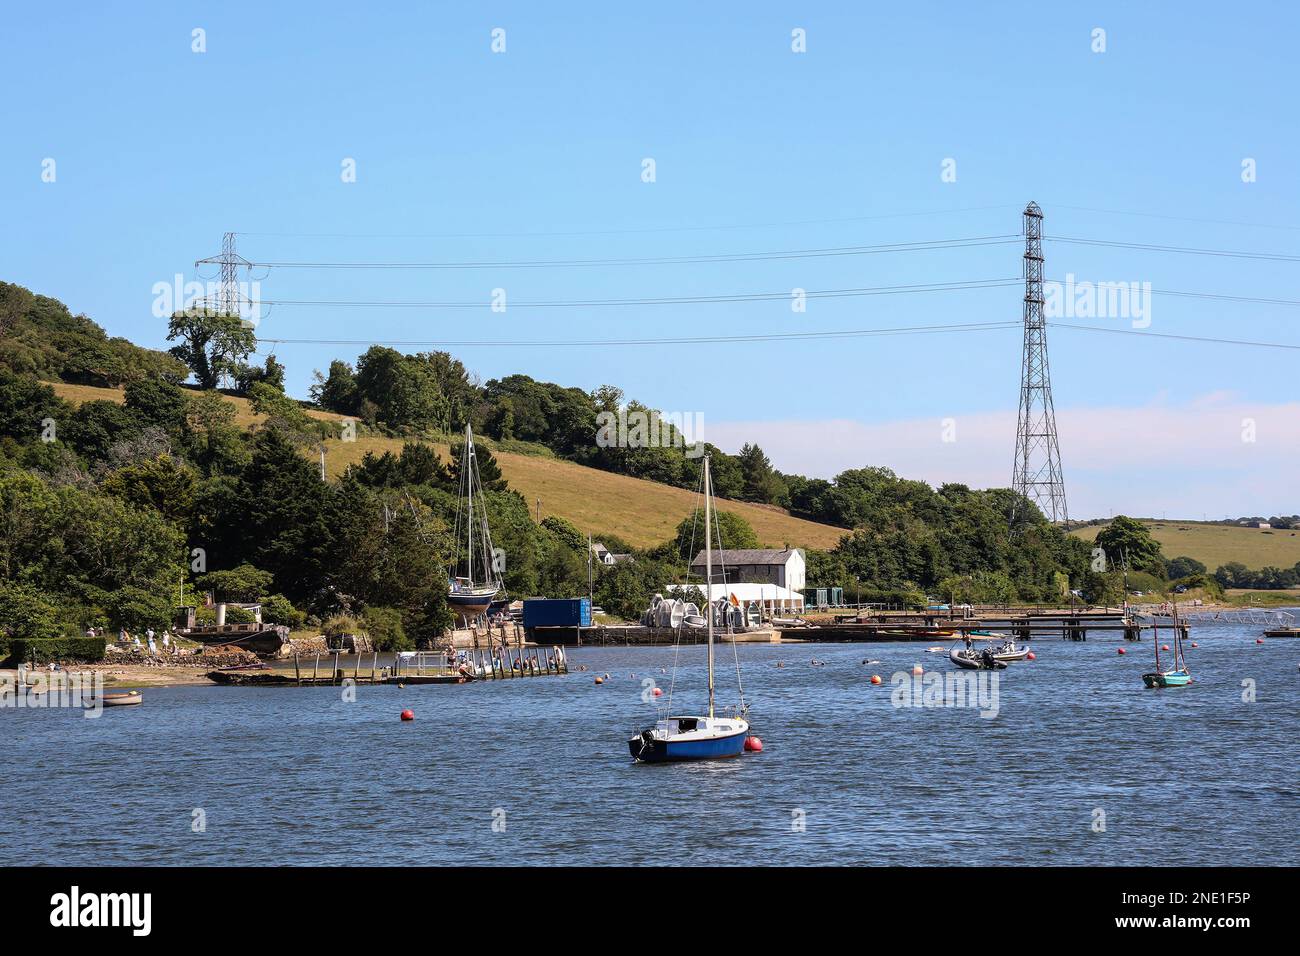 A busy day at Weir Quay on the sheltered Devon banks of the River Tamar. Taken on a cruise up the River Tamar from Plymouth, Summer 2022. Heatwave; Stock Photo